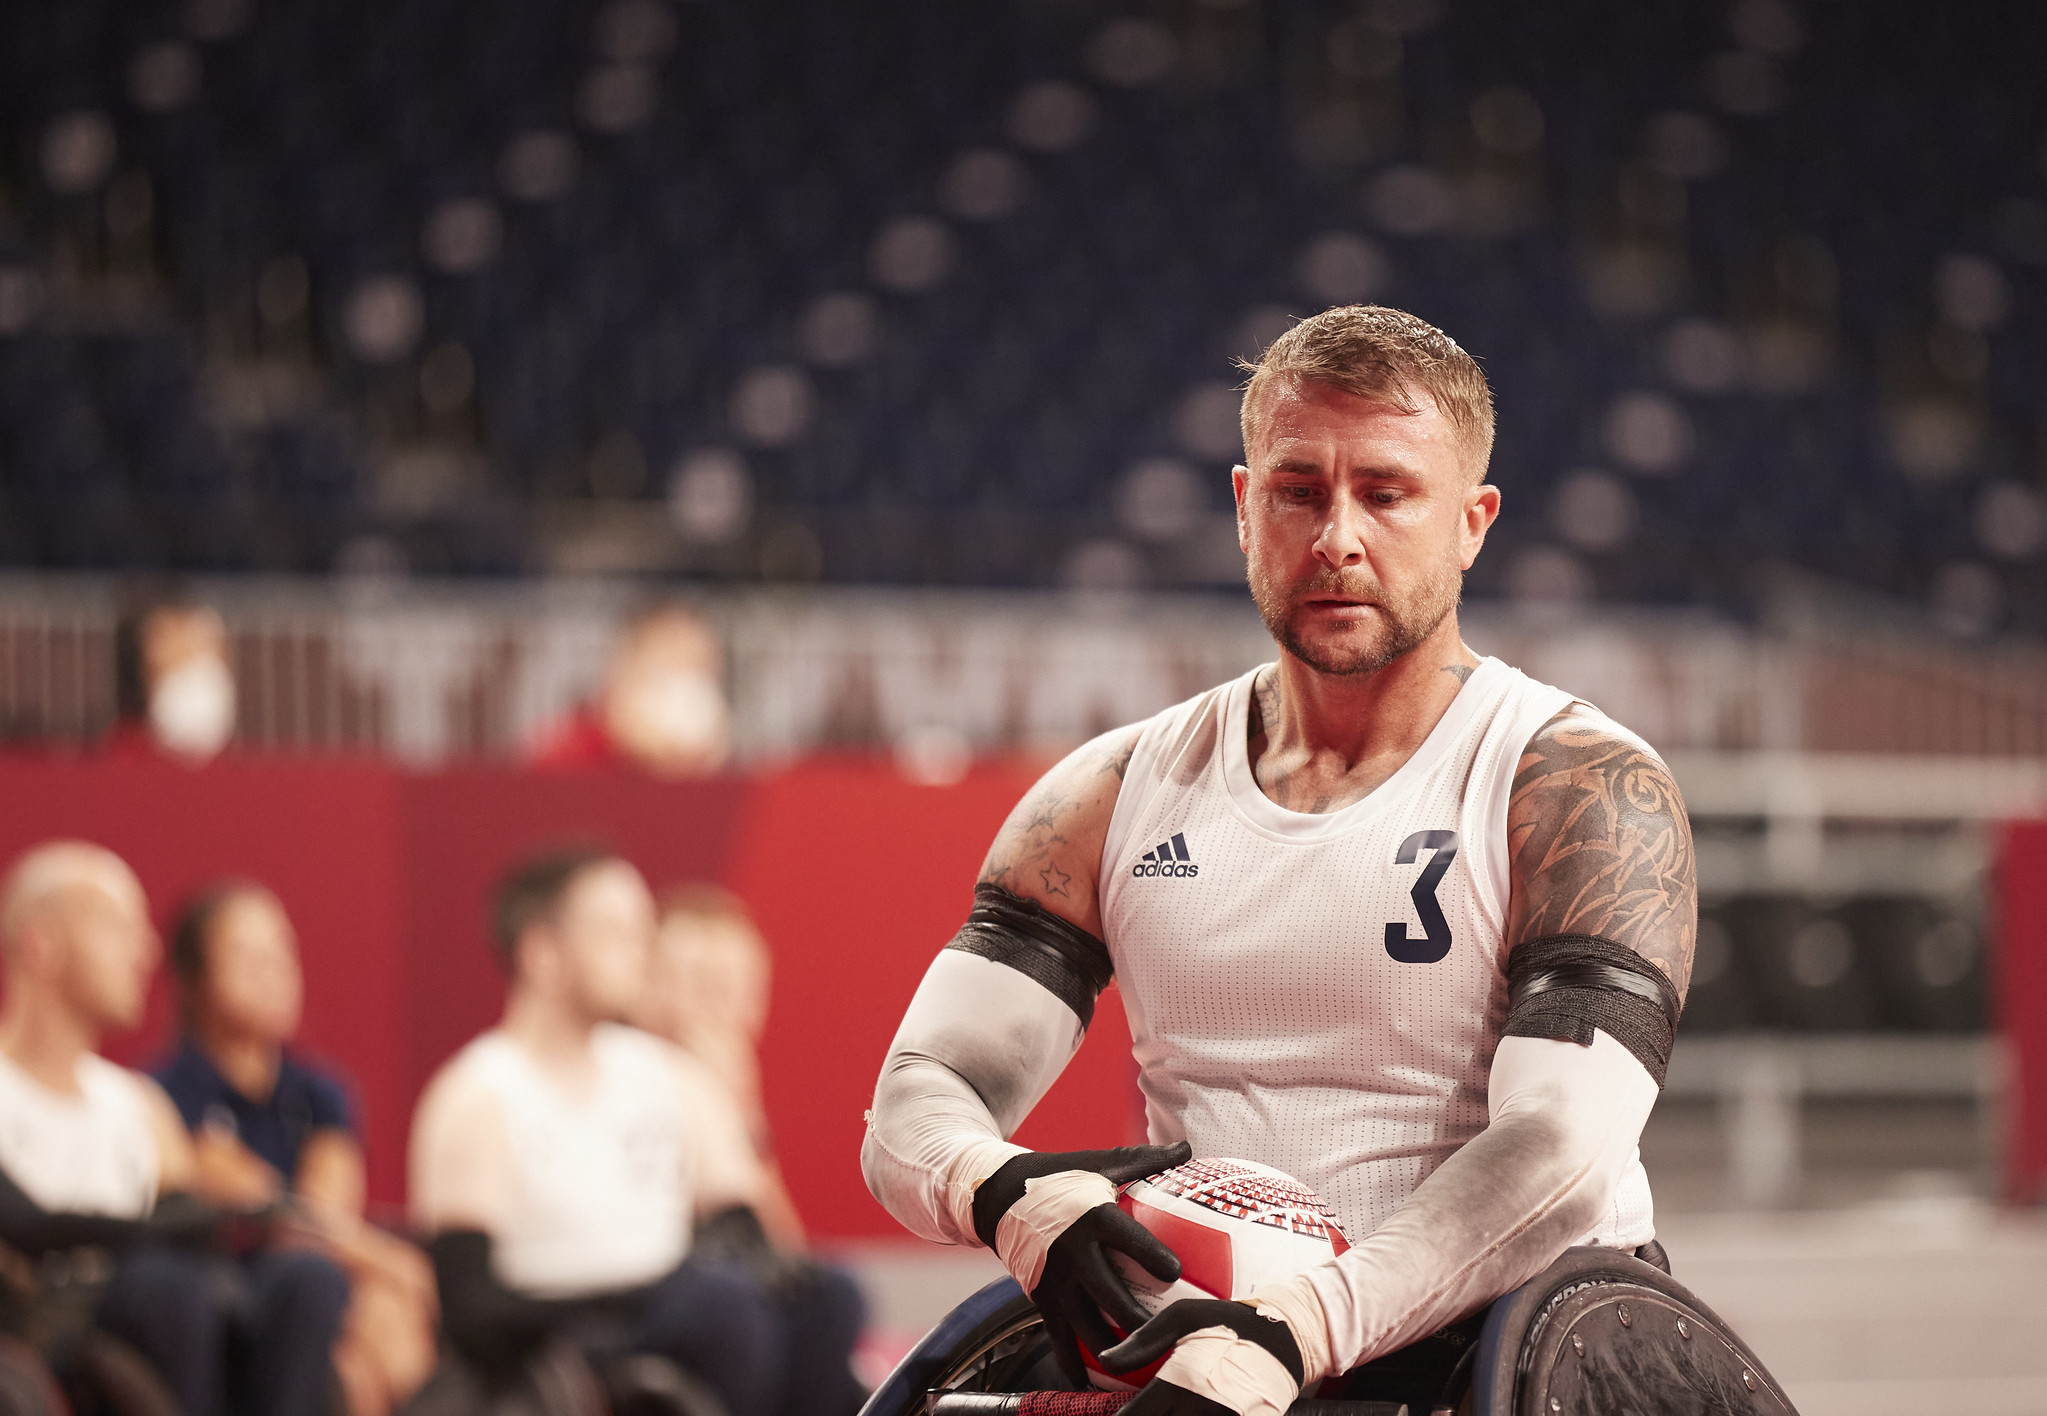 Wheelchair rugby player holding the ball.